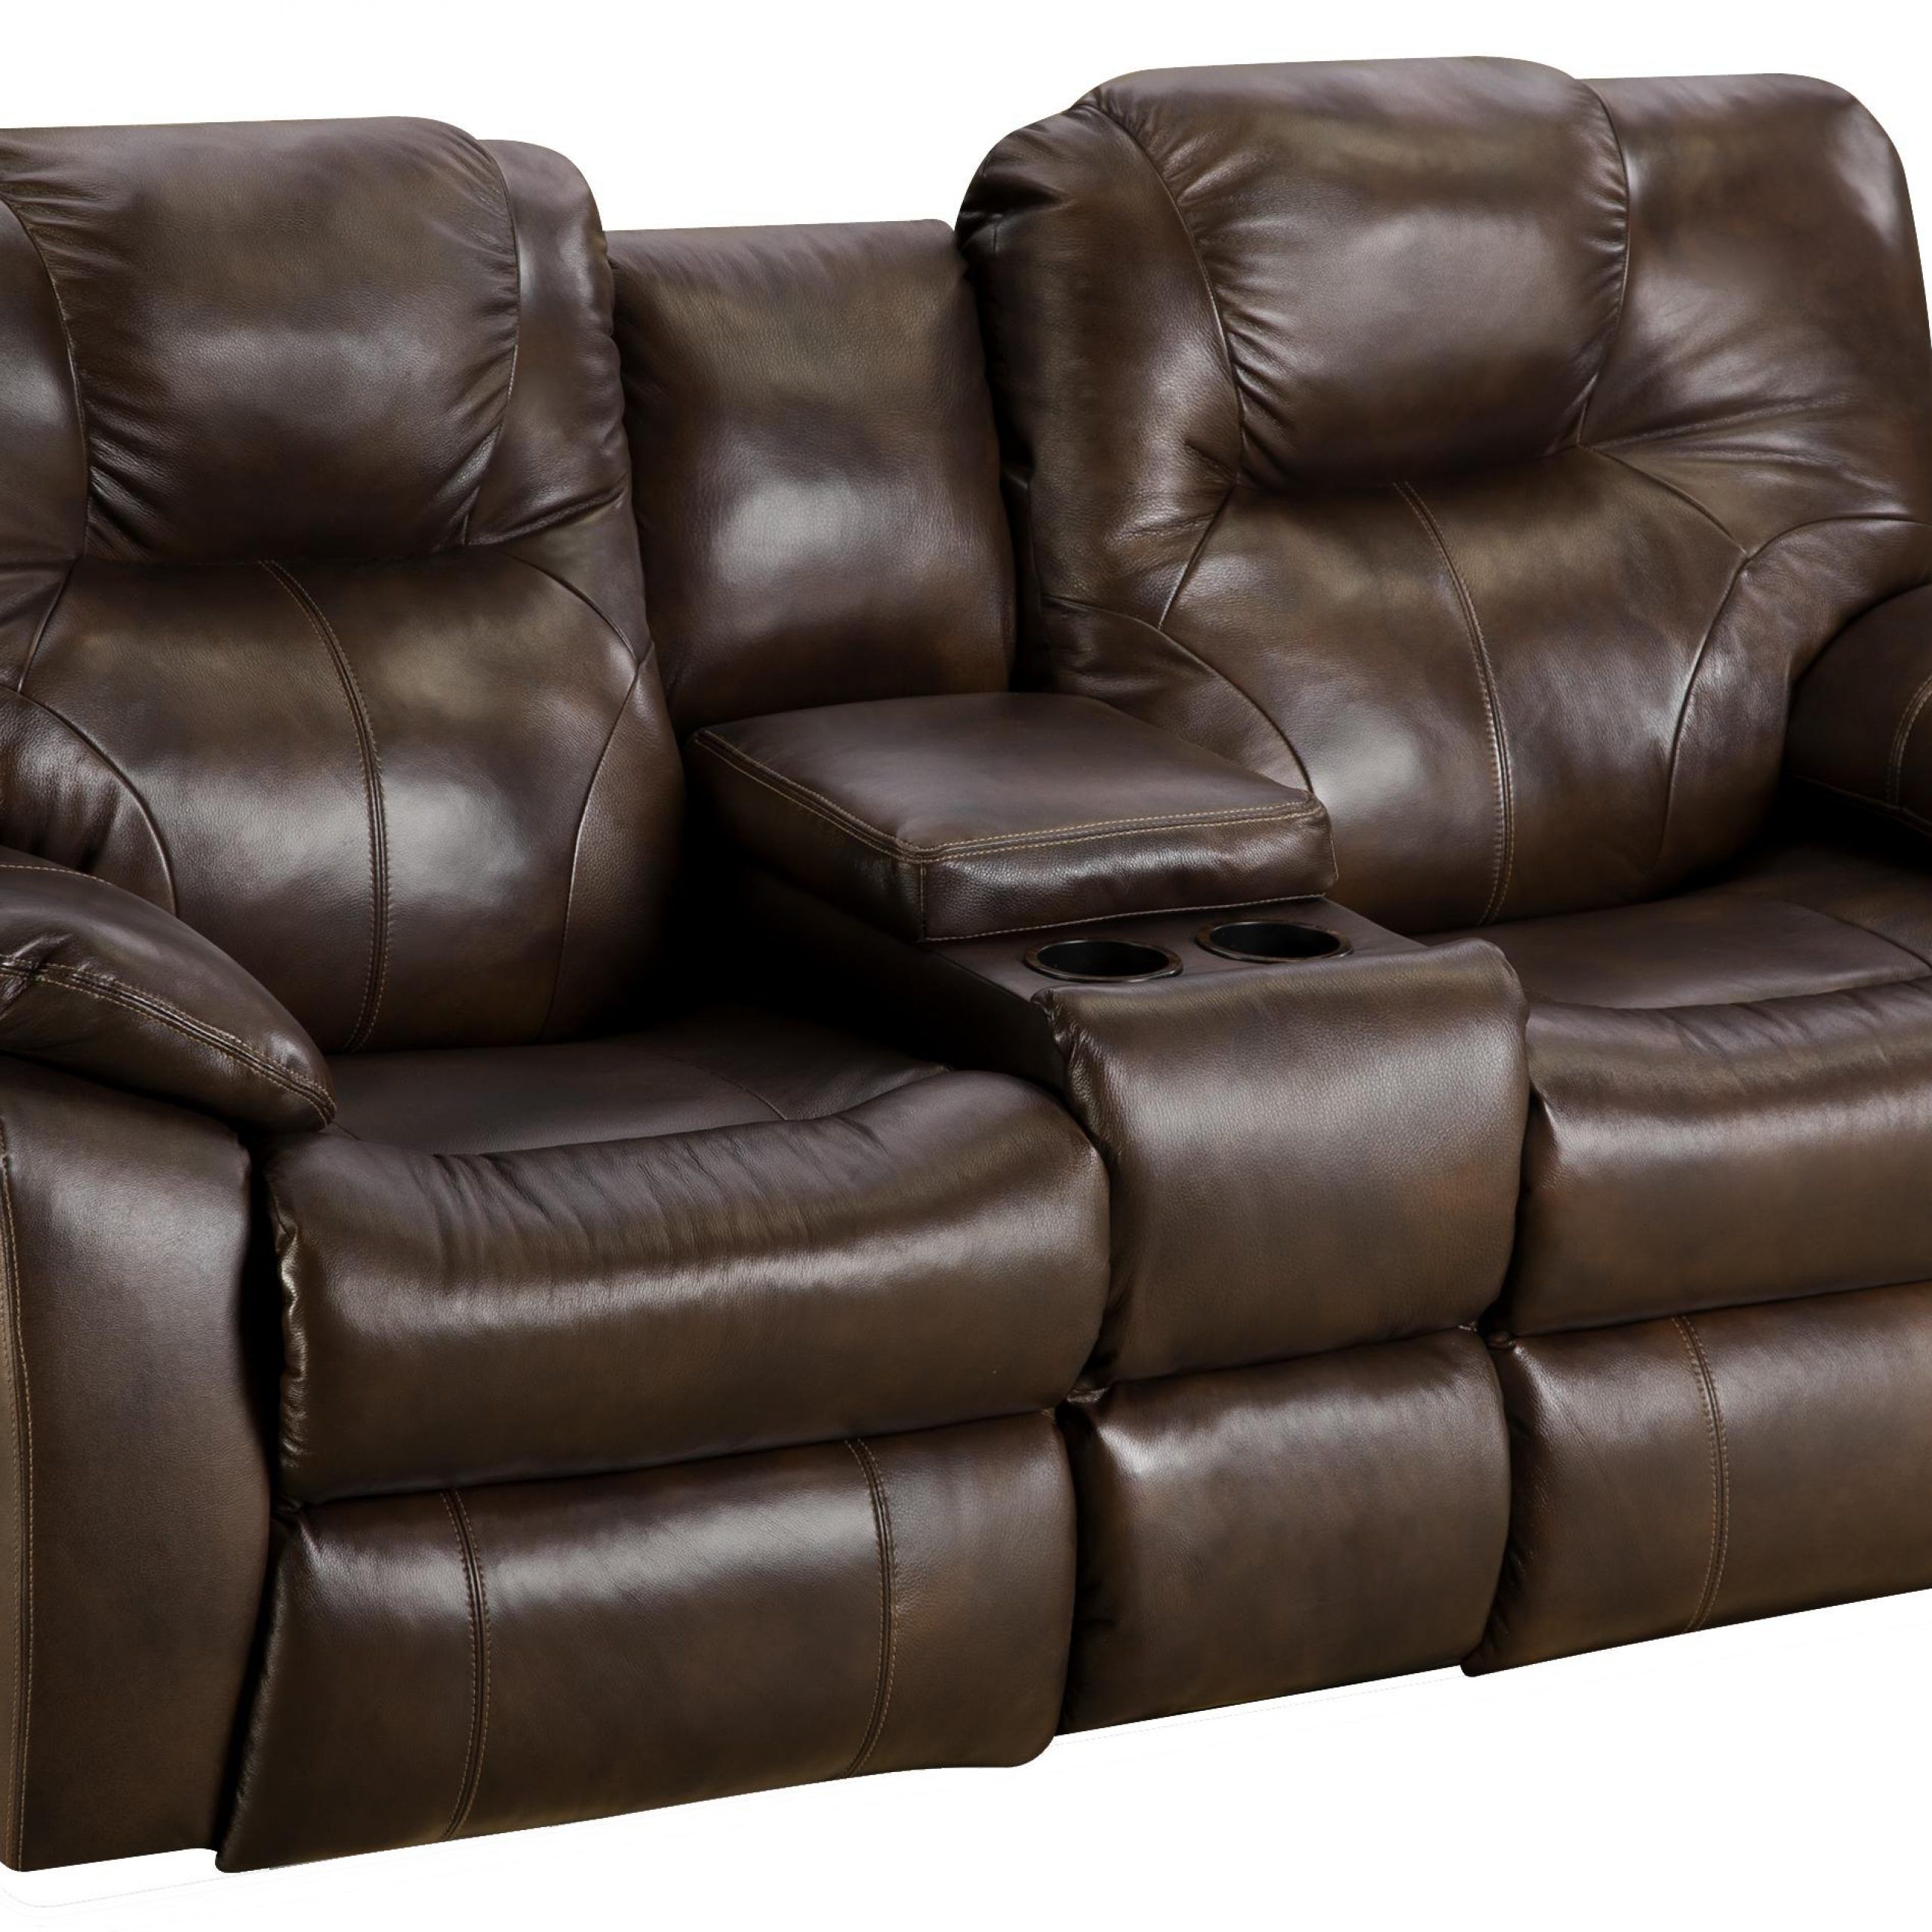 Power Reclining Sofa With Consolesouthern Motion With Regard To Raven Power Reclining Sofas (View 11 of 15)